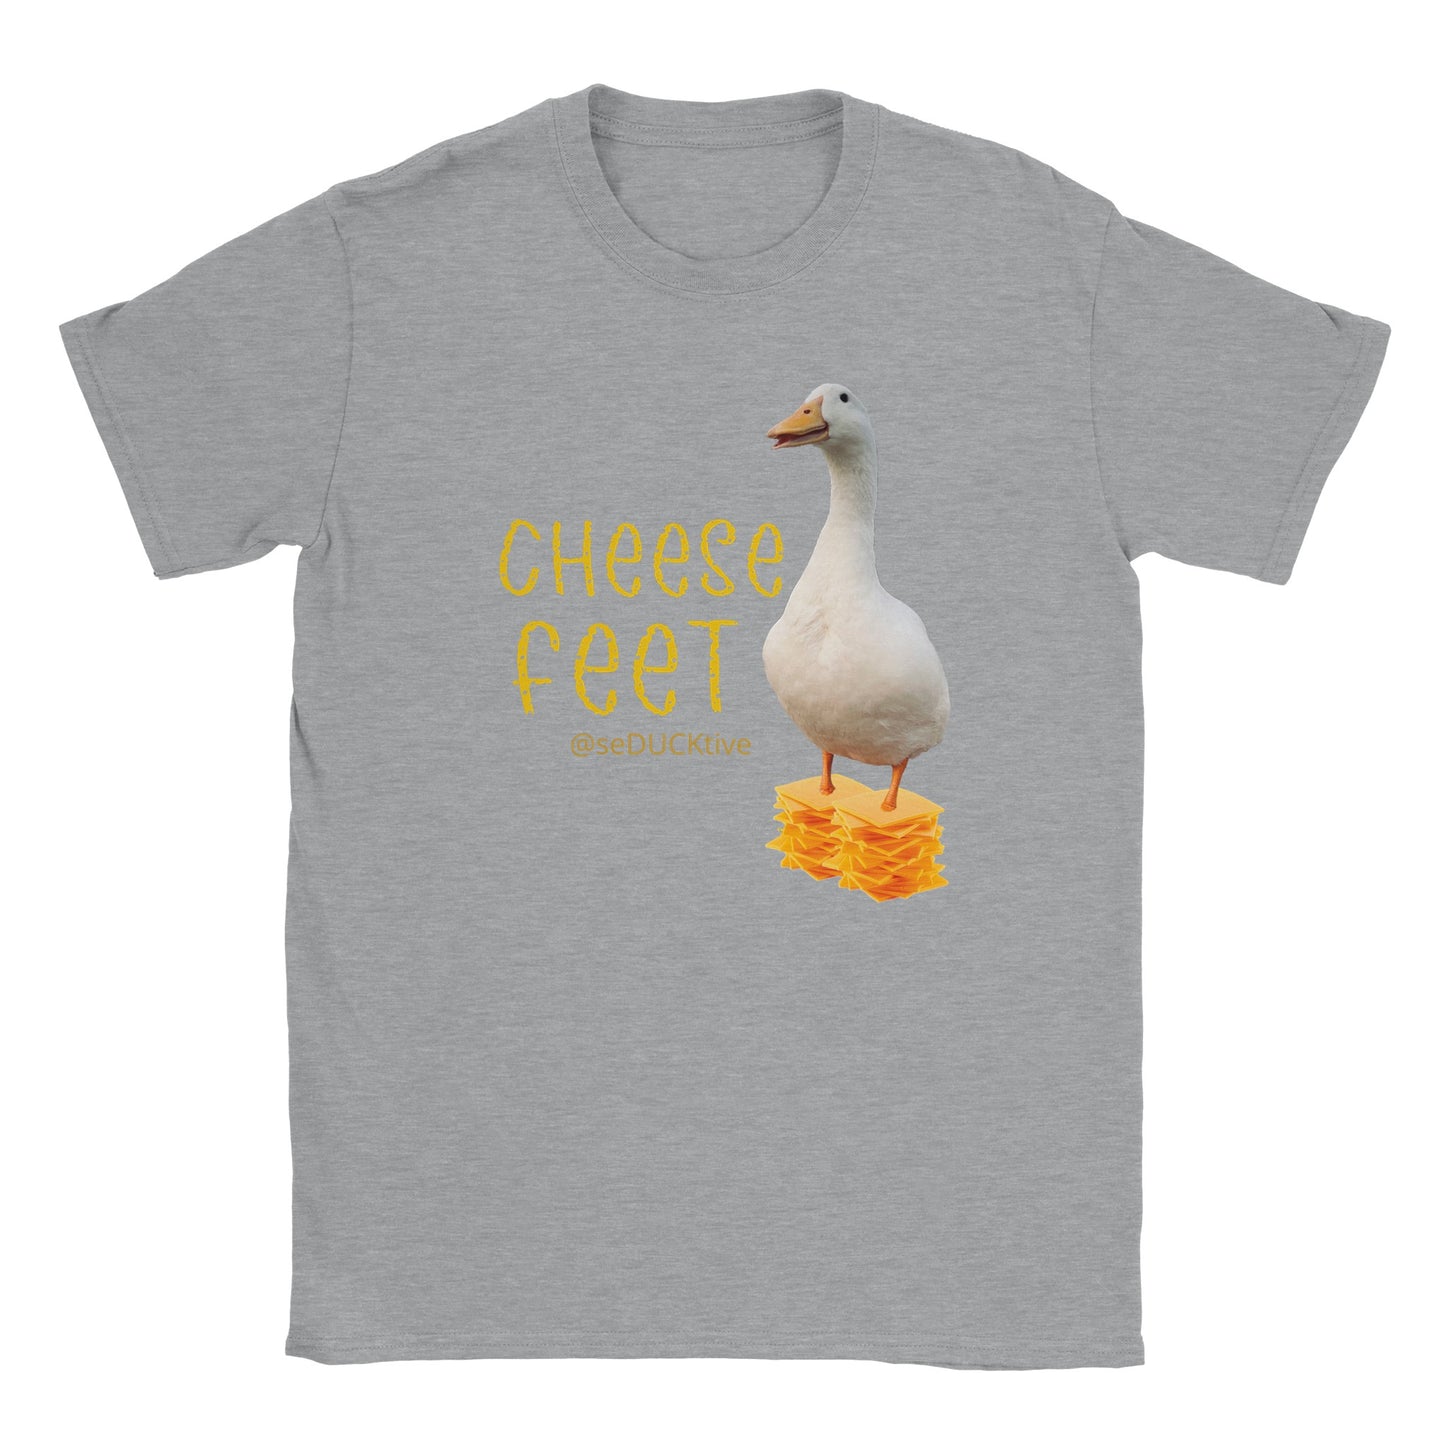 Cheese Feet T Shirt - stack of cheese